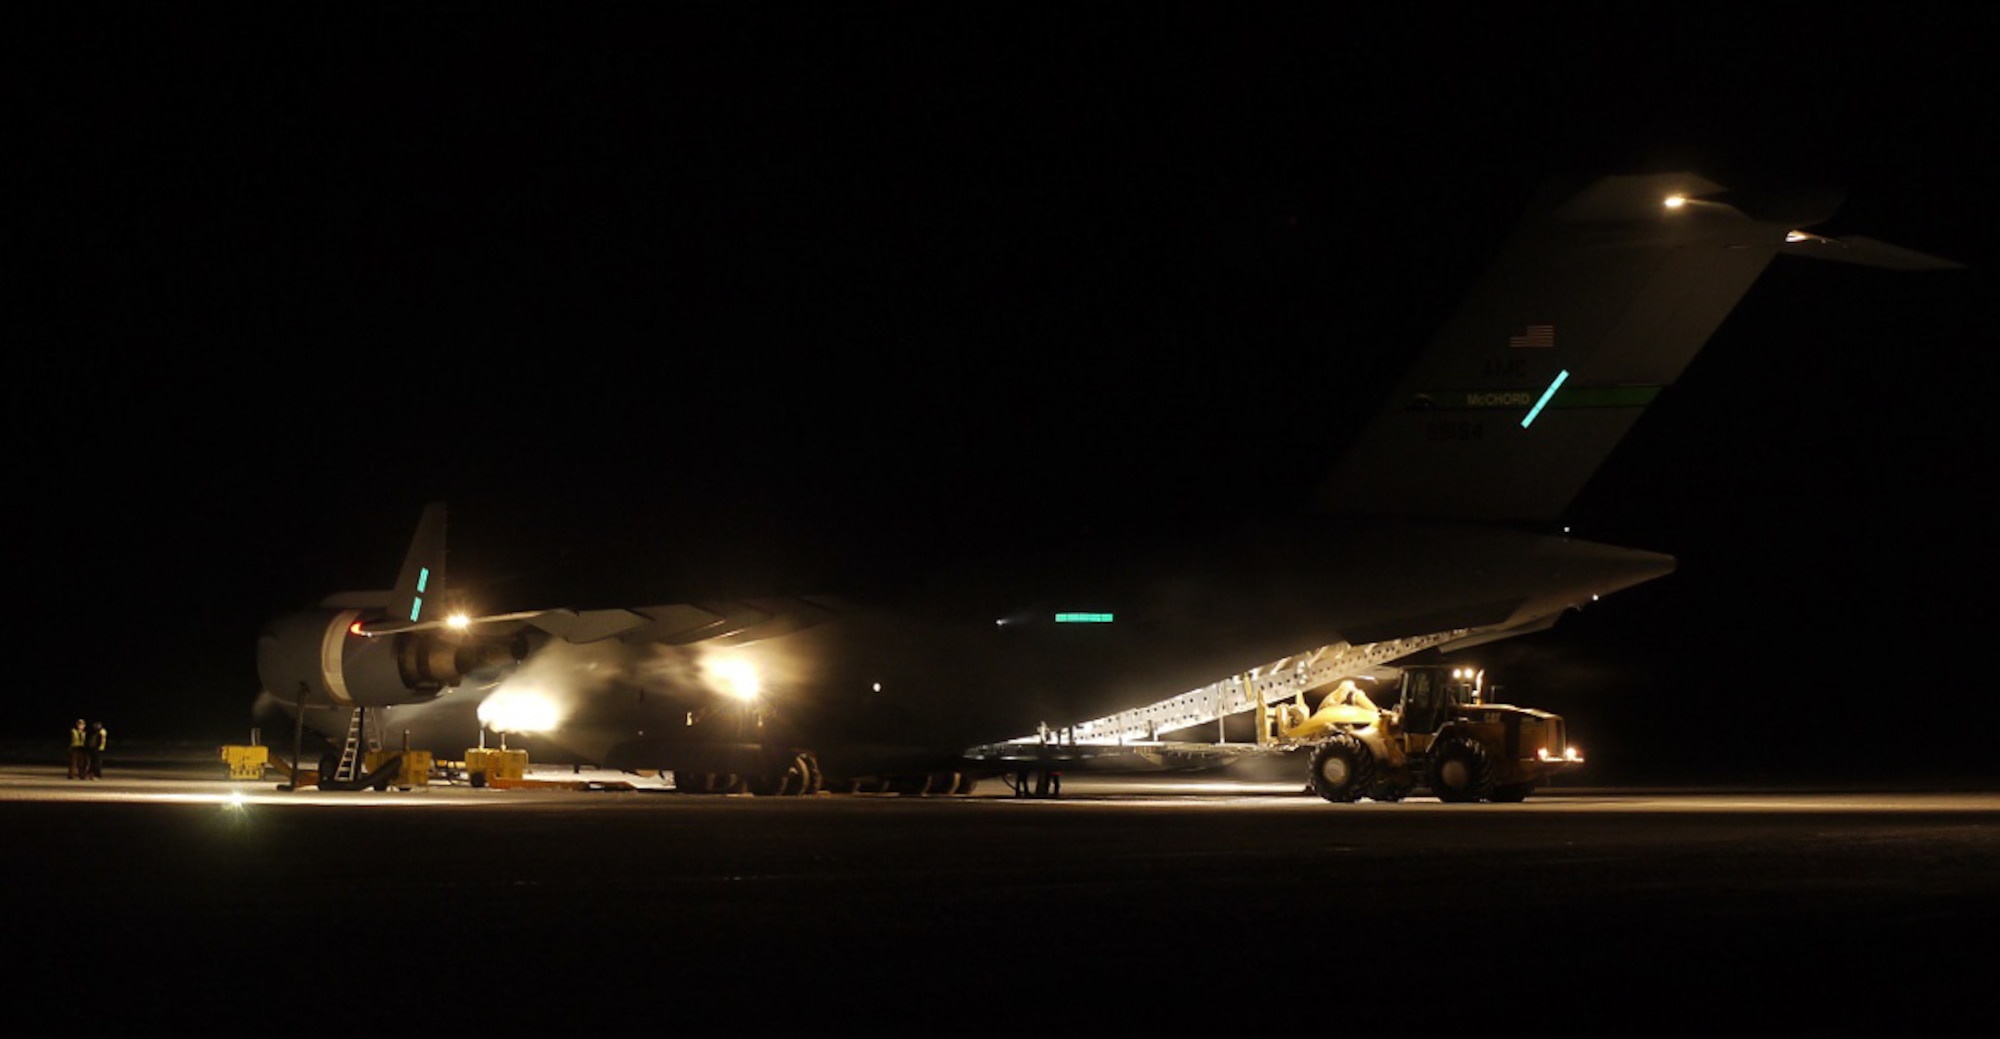 Cargo is off loaded from a McChord C-17 Globemaster III during WinFly Aug. 26, 2016 at McMurdo Station, Antarctica. The 62nd Airlift Wing crew was on the ice Aug. 26-27 for 4 hours to deliver advance teams and equipment for the upcoming main season of Operation Deep Freeze. (Courtesy photo)